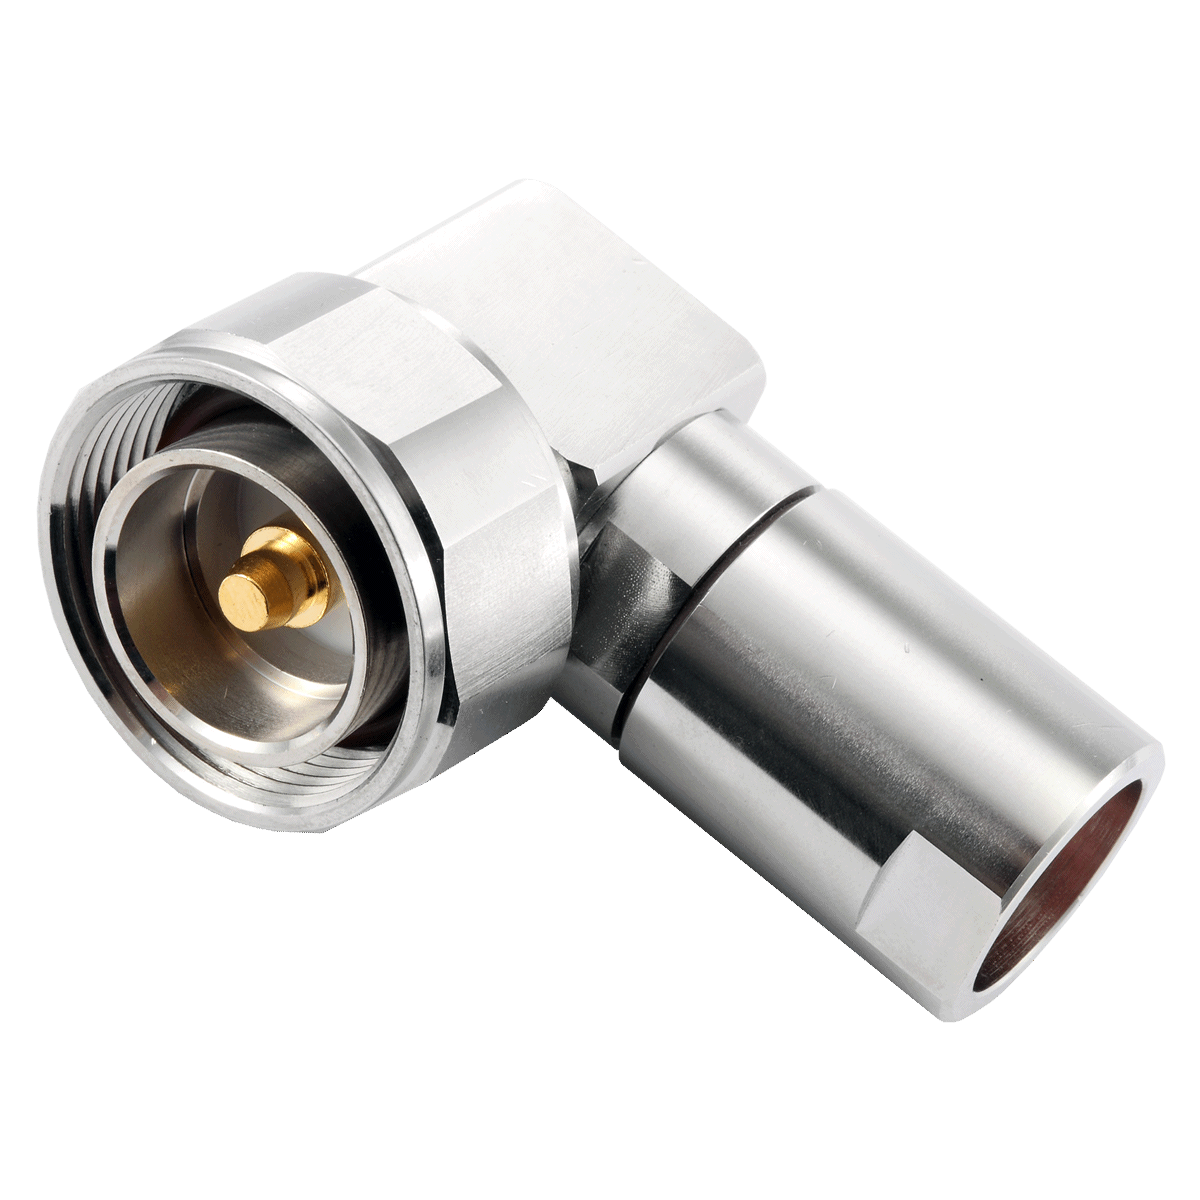 7/16 DIN Male Plug Female jk center clamp for 1/2" corrugated cable RF connector 